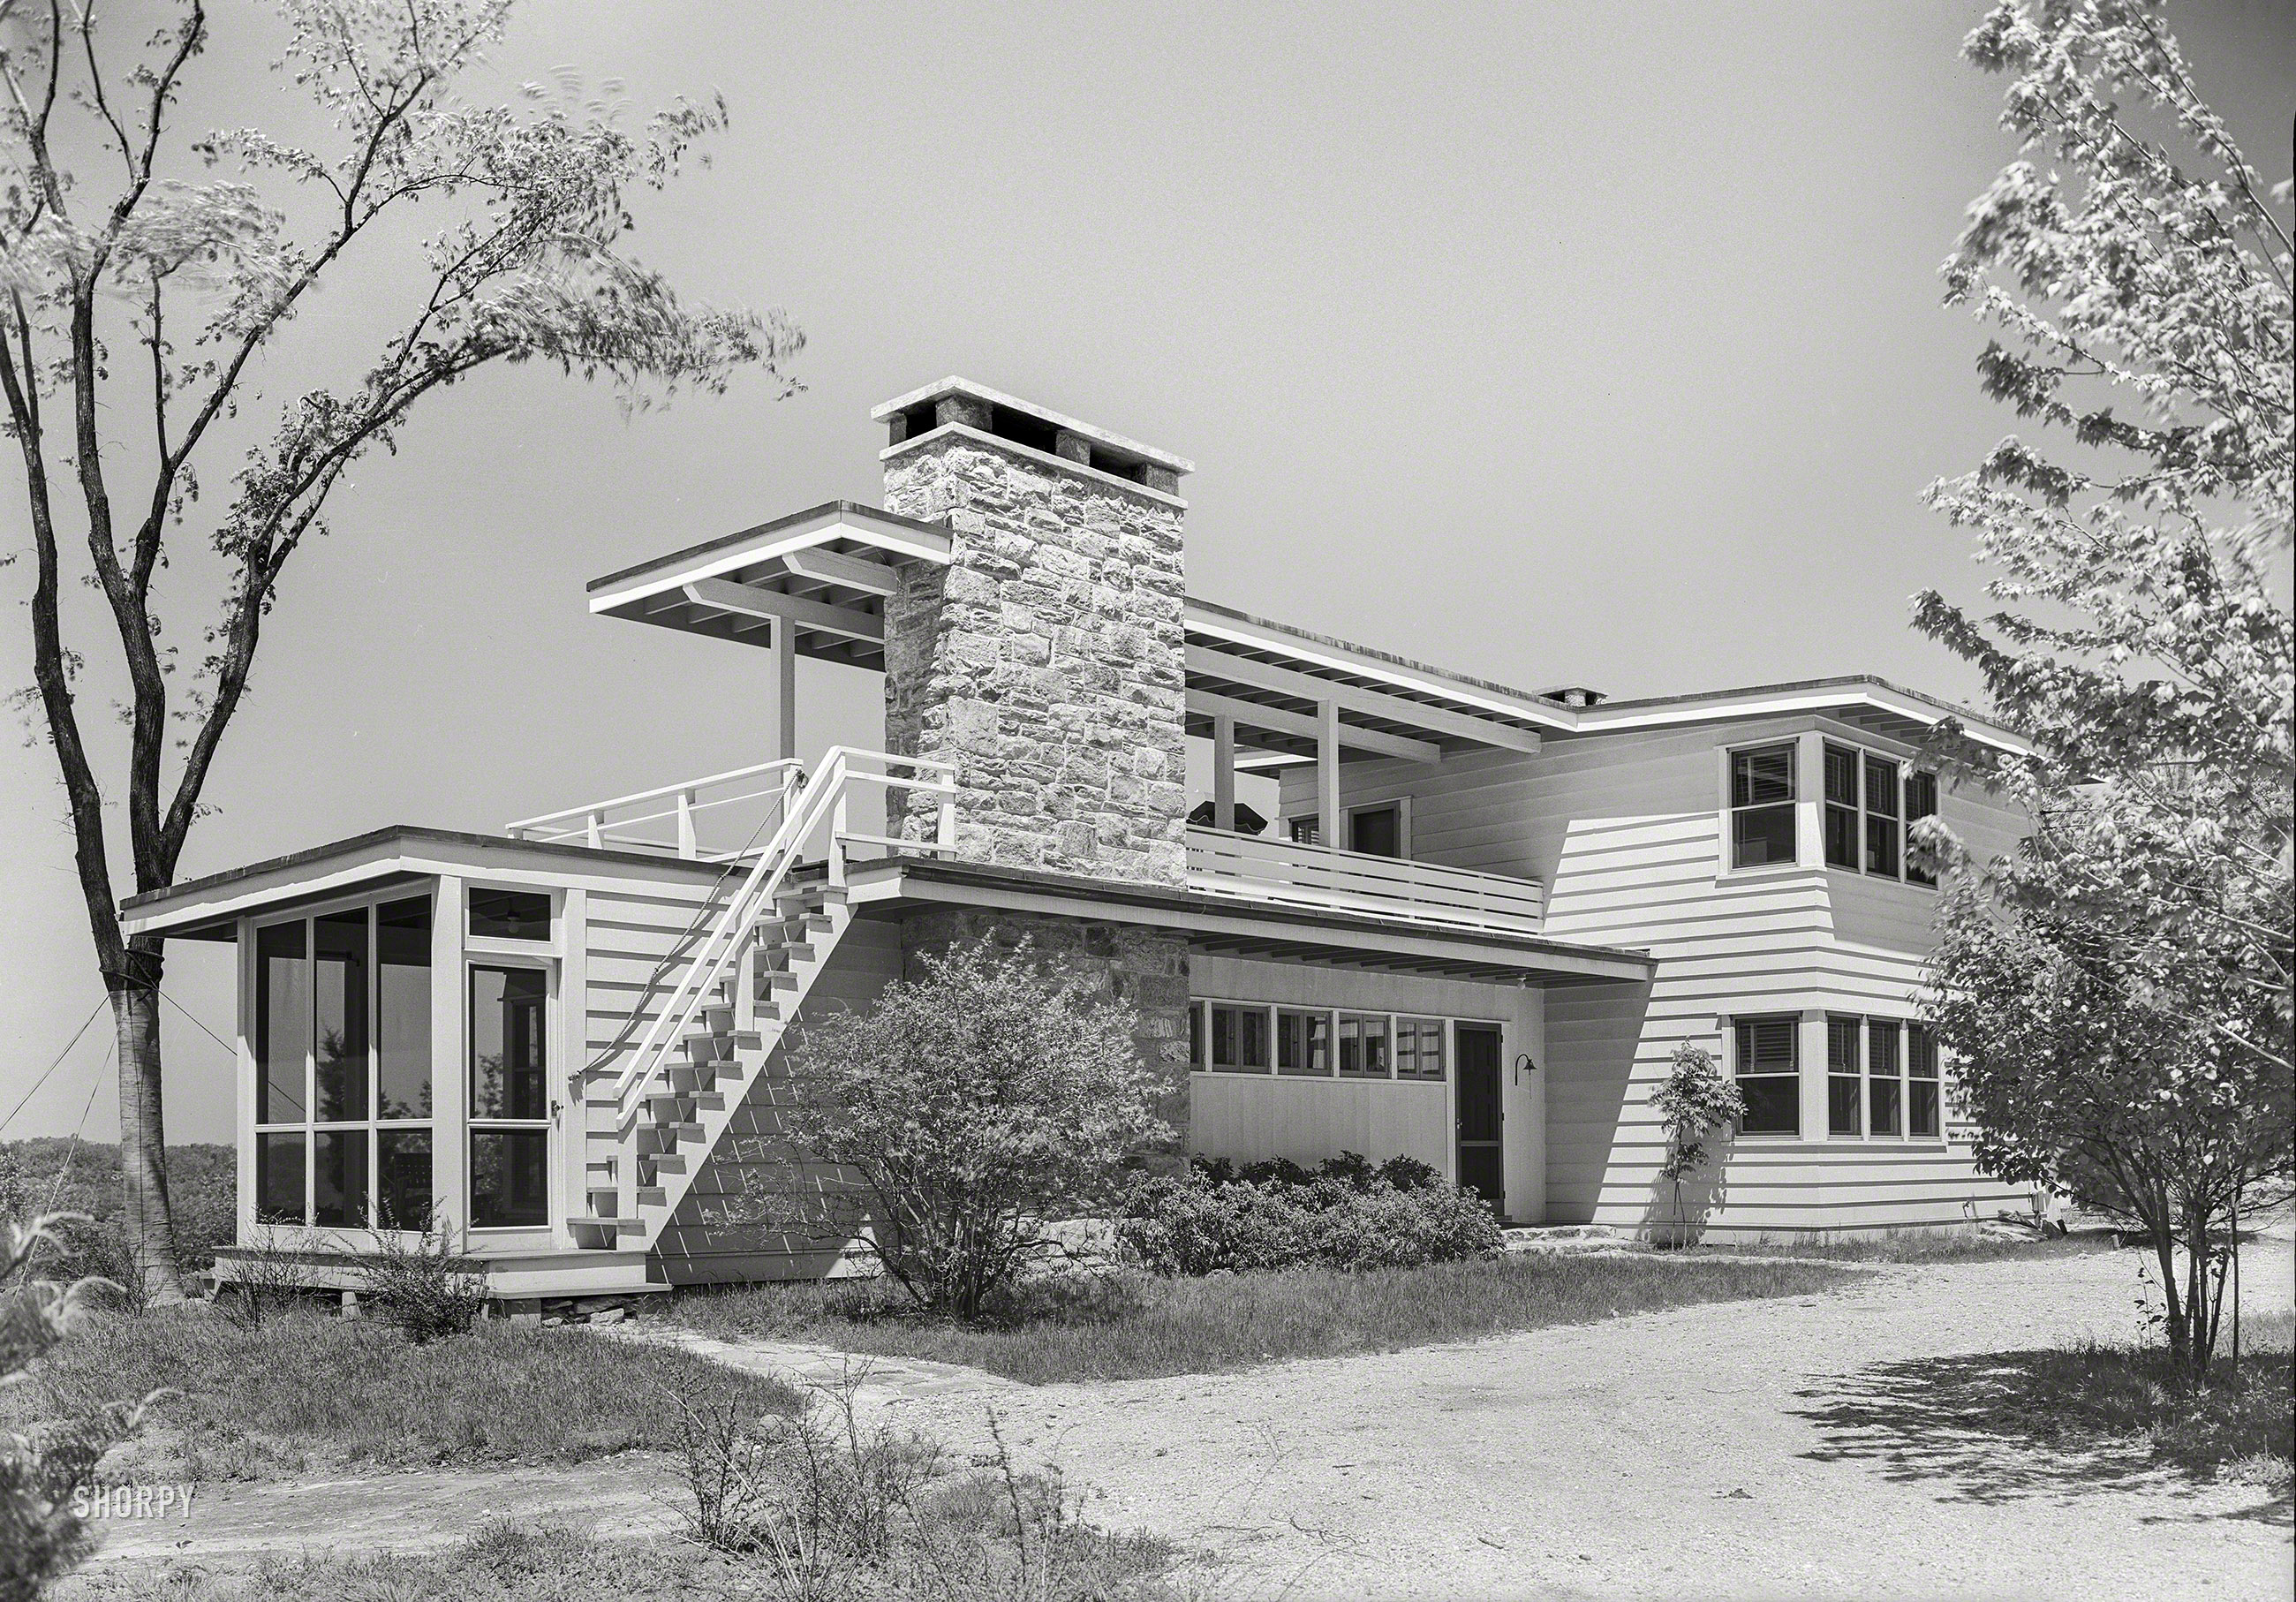 May 30, 1940. "Bertram F. Willcox residence in Pound Ridge, Westchester County, New York. Outside stairs to upper deck. Moore & Hutchins, architect." Large-format acetate negative by Gottscho-Schleisner. View full size.